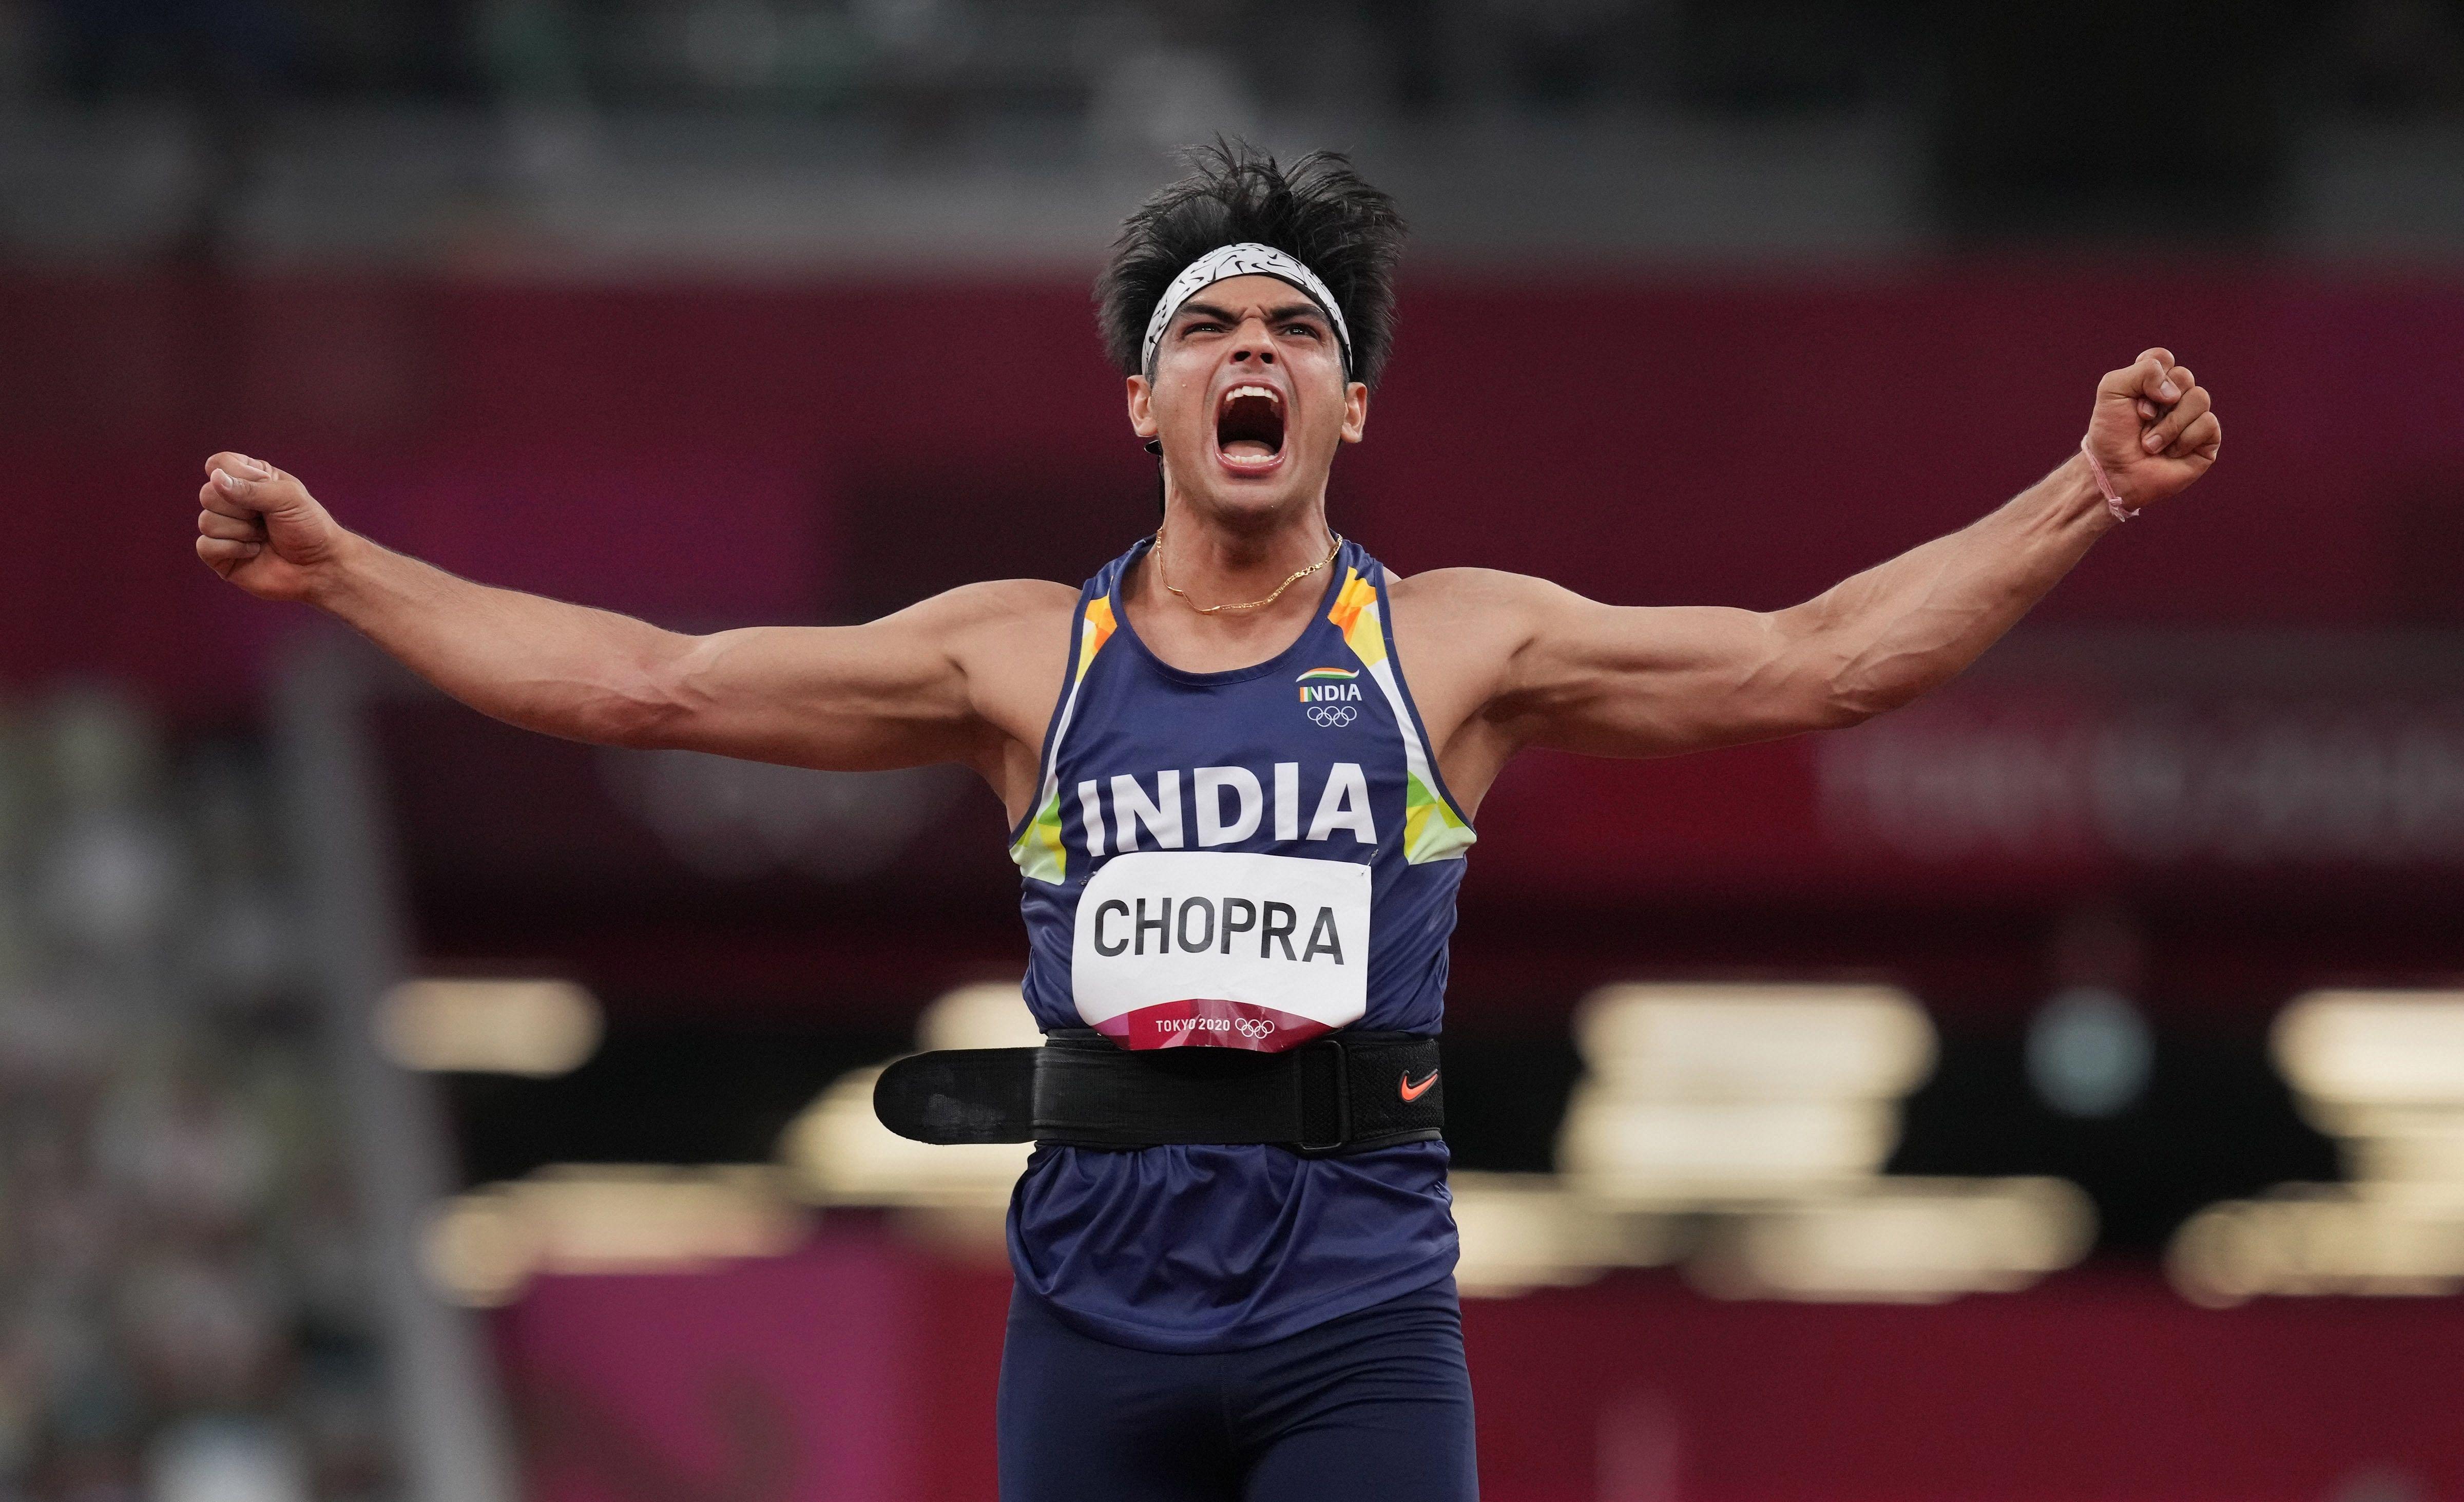 7) Neeraj Chopra wins historic gold at Tokyo Olympics 
On August 7, Neeraj Chopra created history as he became the first Indian athlete in track and field discipline---and second after shooter Abhinav Bindra---to win an individual Gold at the Olympics. He won the yellow metal in the men's javelin throw event with a throw of 87.58m in his second attempt at Tokyo Olympics 2020.
Photo caption: Neeraj Chopra after his historic throw at Tokyo Olympics 2021. Pic/PTI